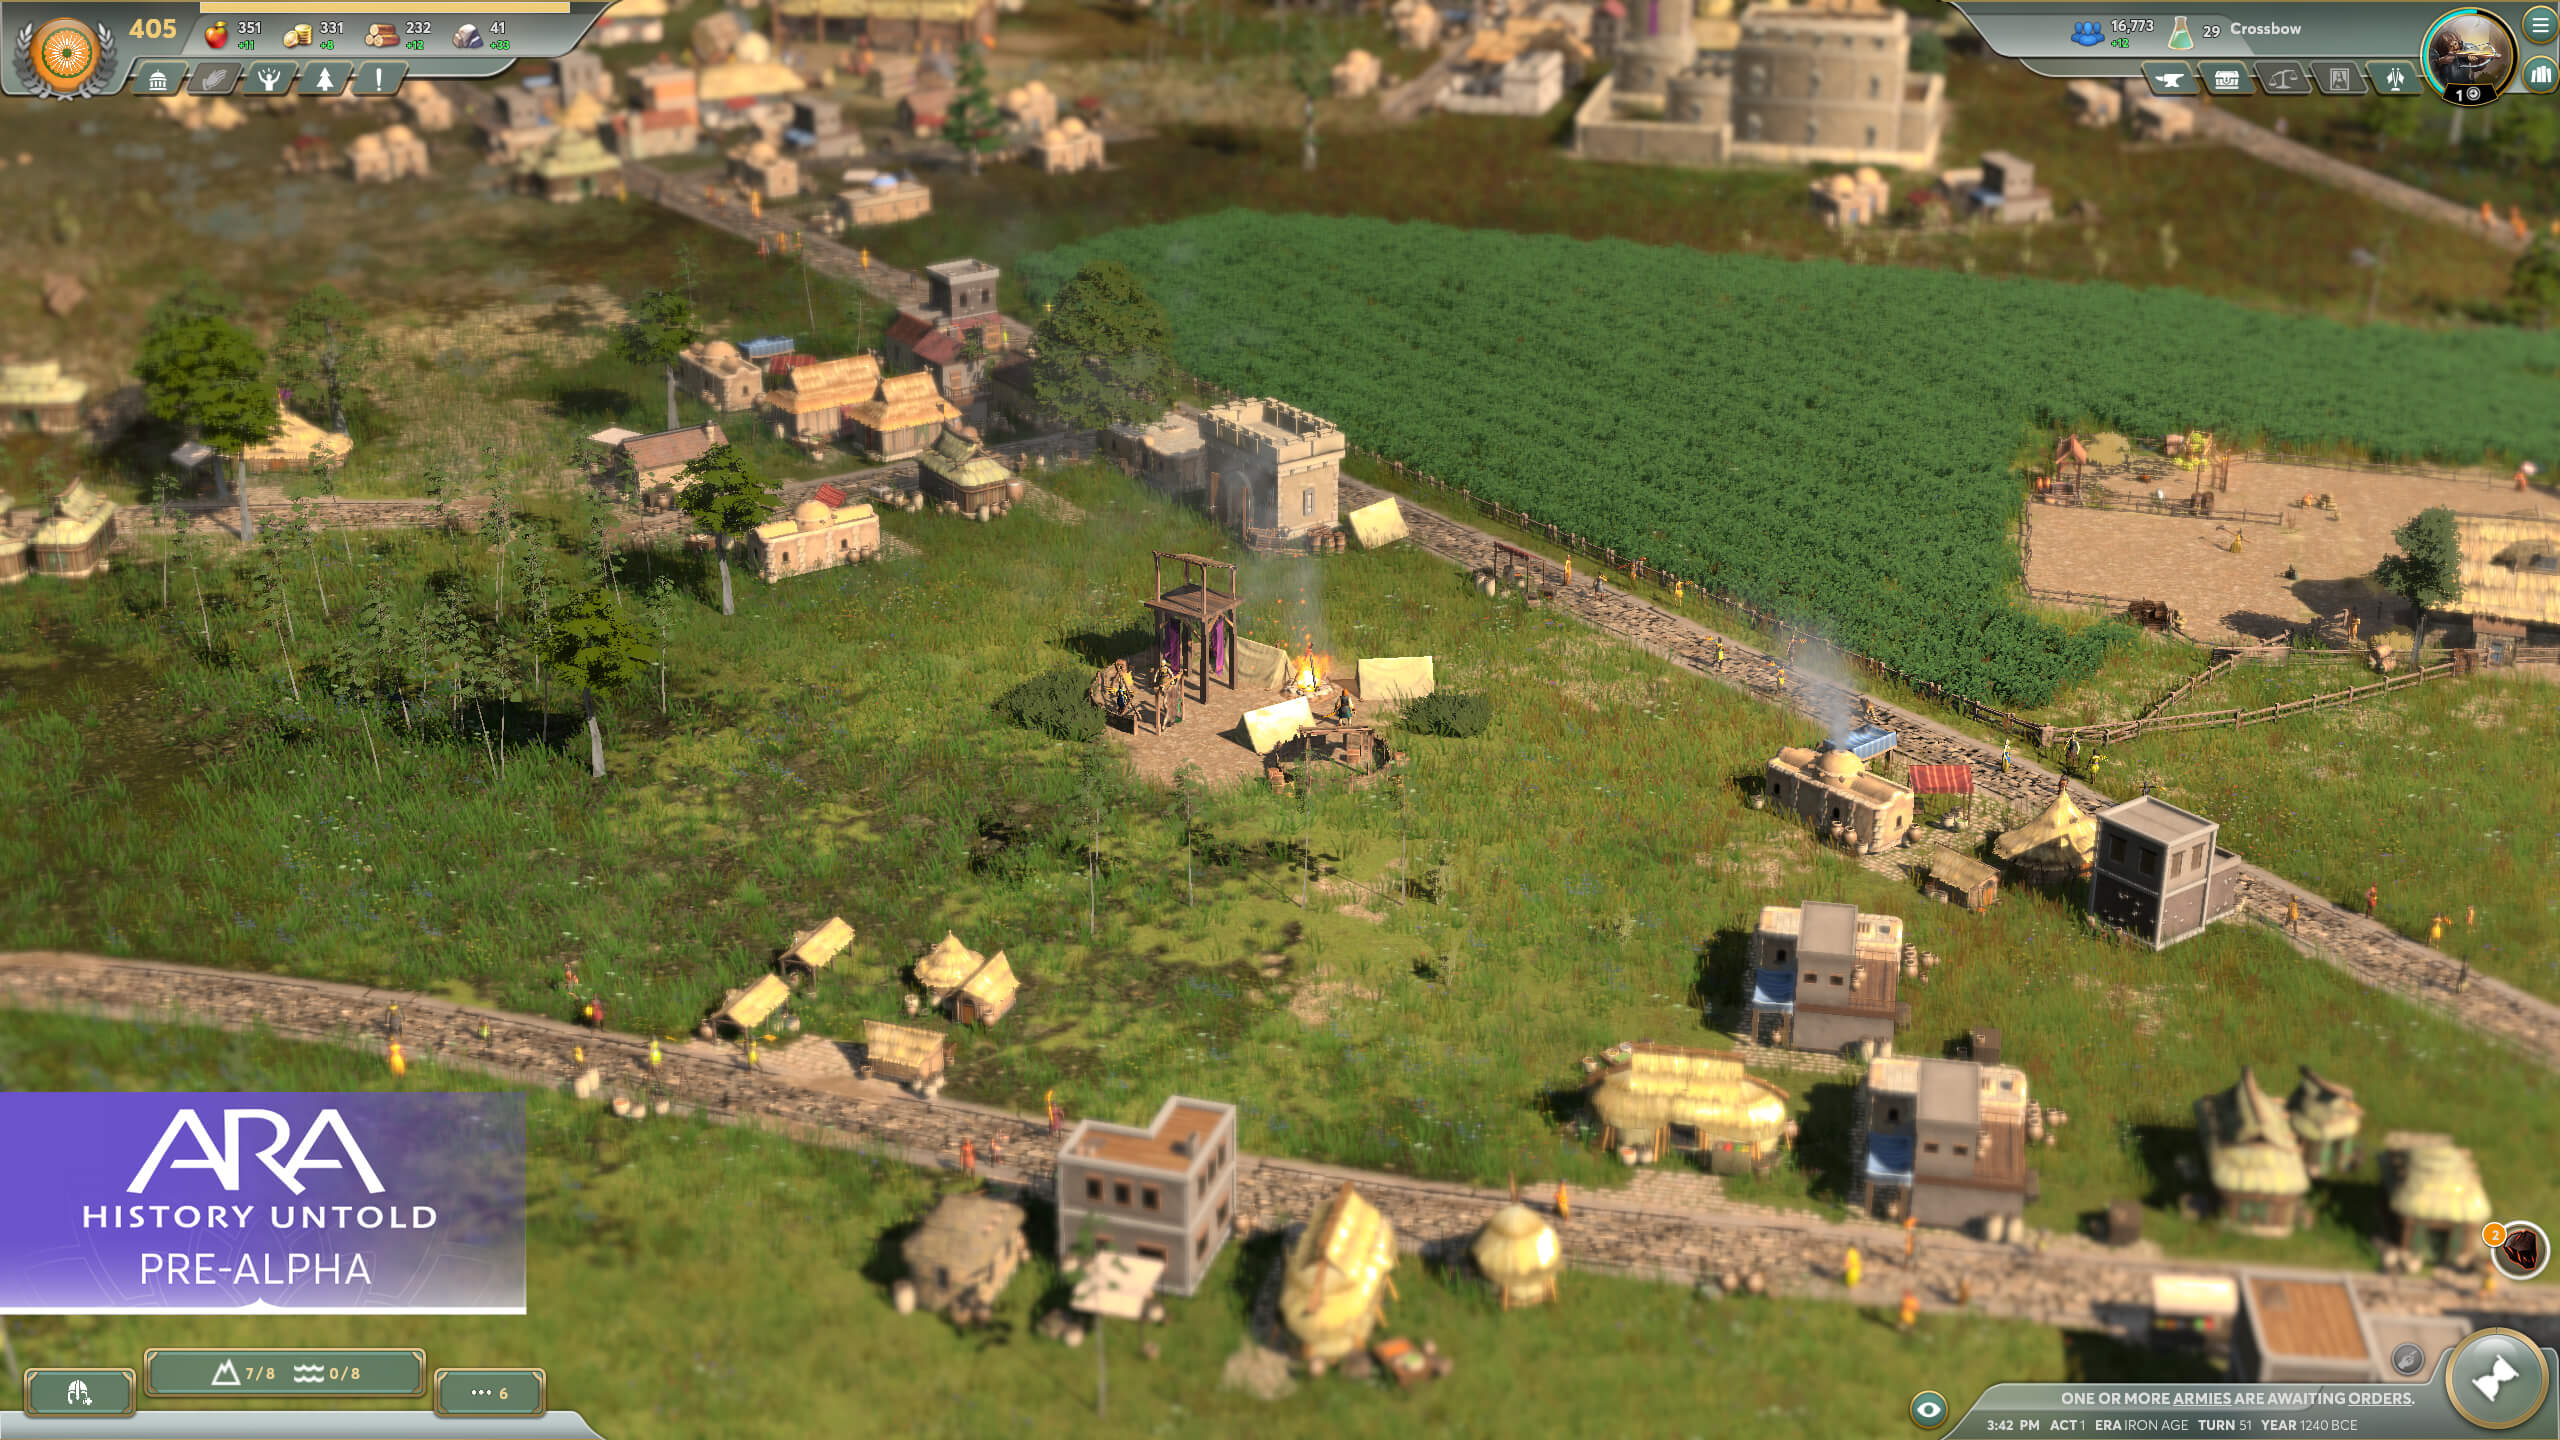 A screenshot from Ara: History Untold of a camp in a busy city.